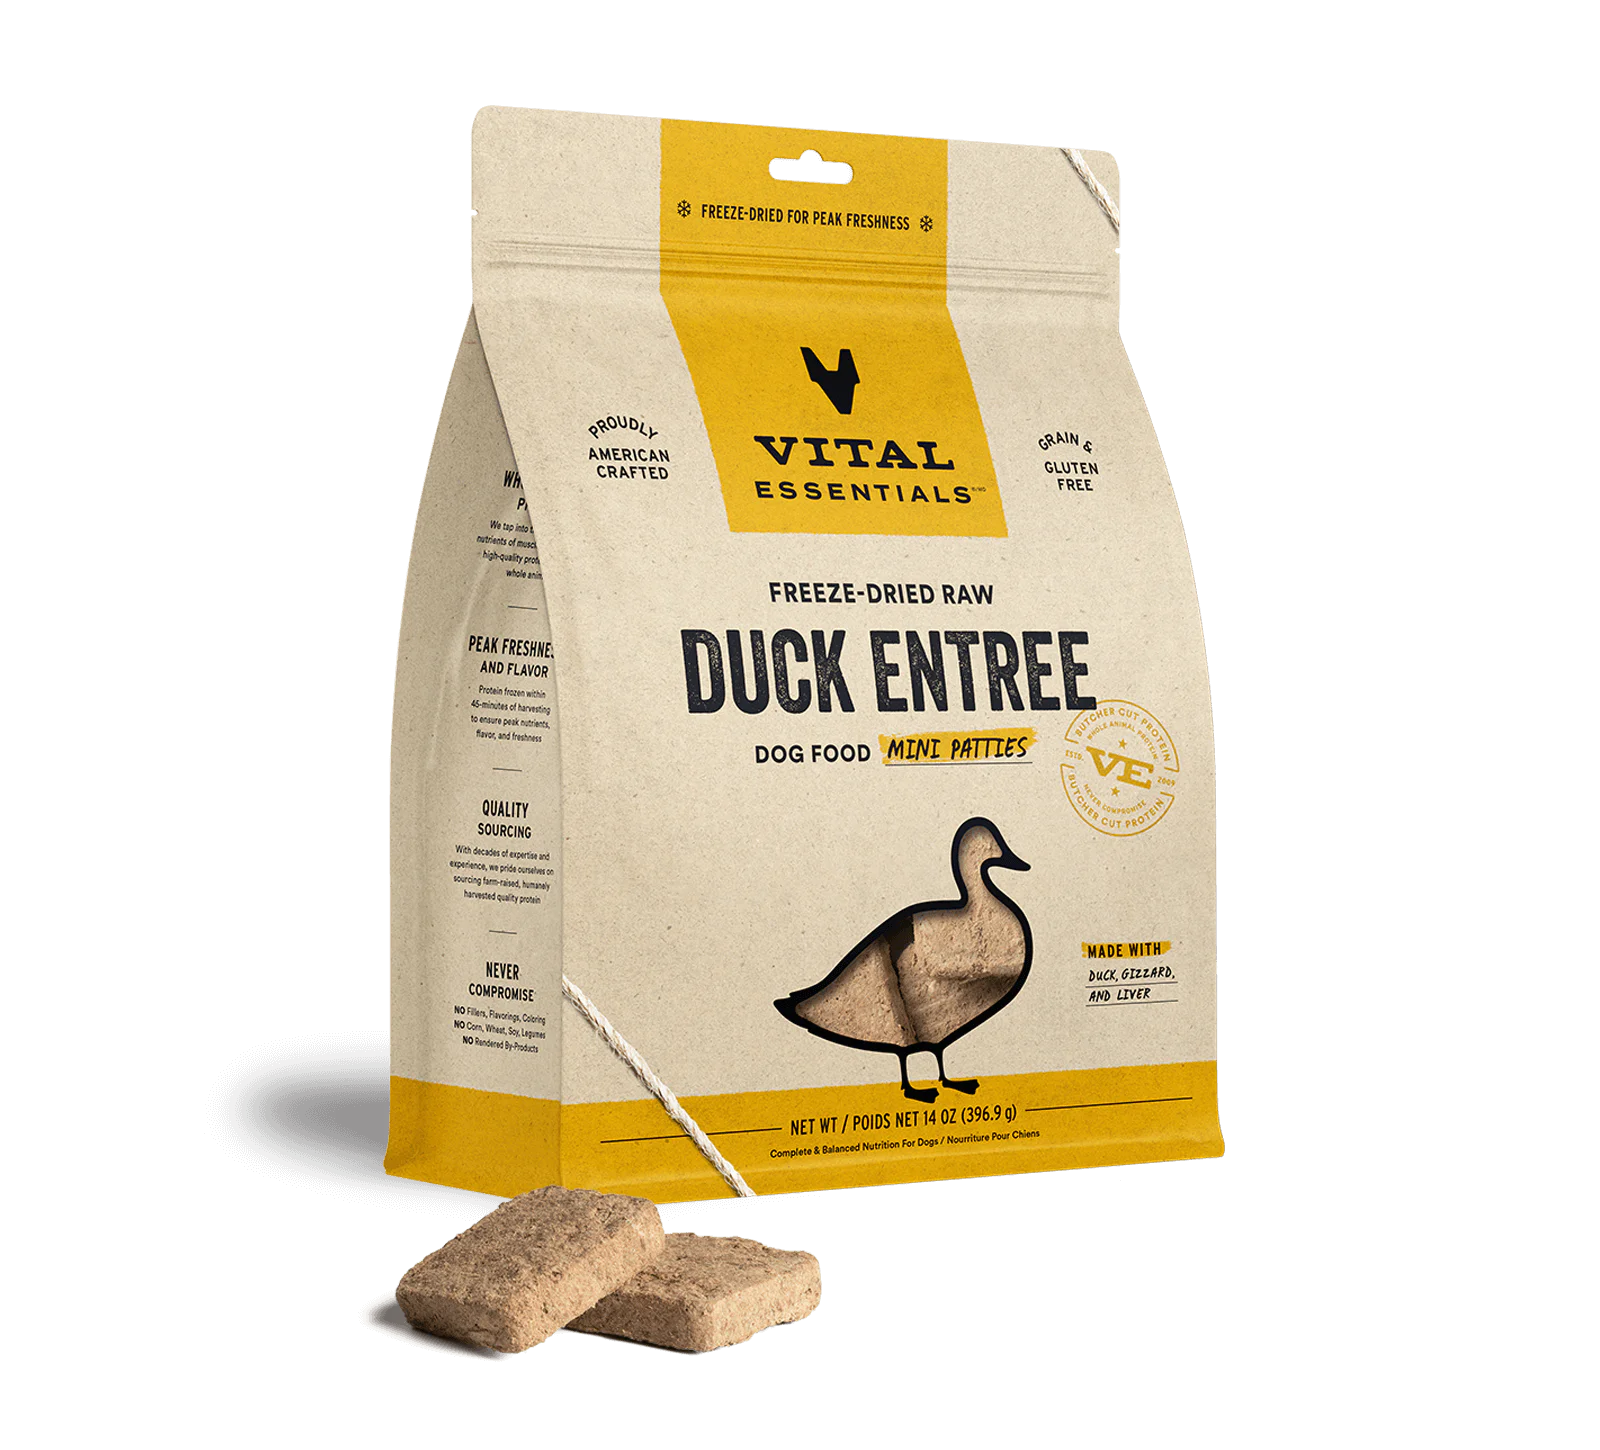 Vital Essentials (VE) - Mini Patties - Freeze-Dried Duck Entree (For Dogs)